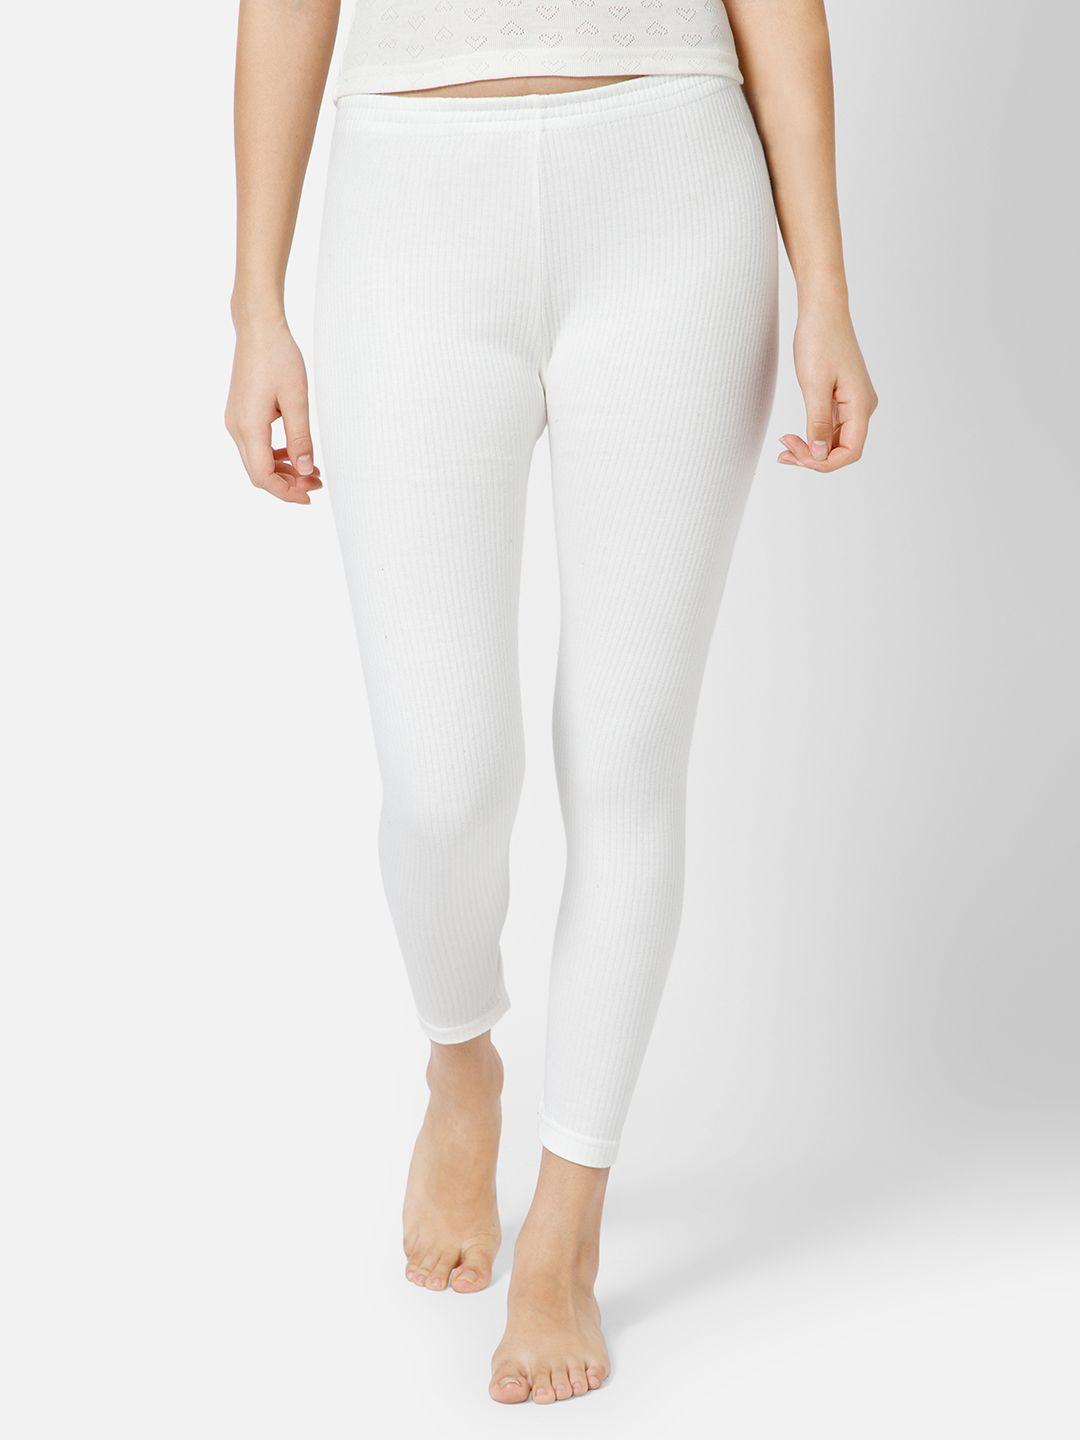 bodycare insider women off-white solid thermal bottoms